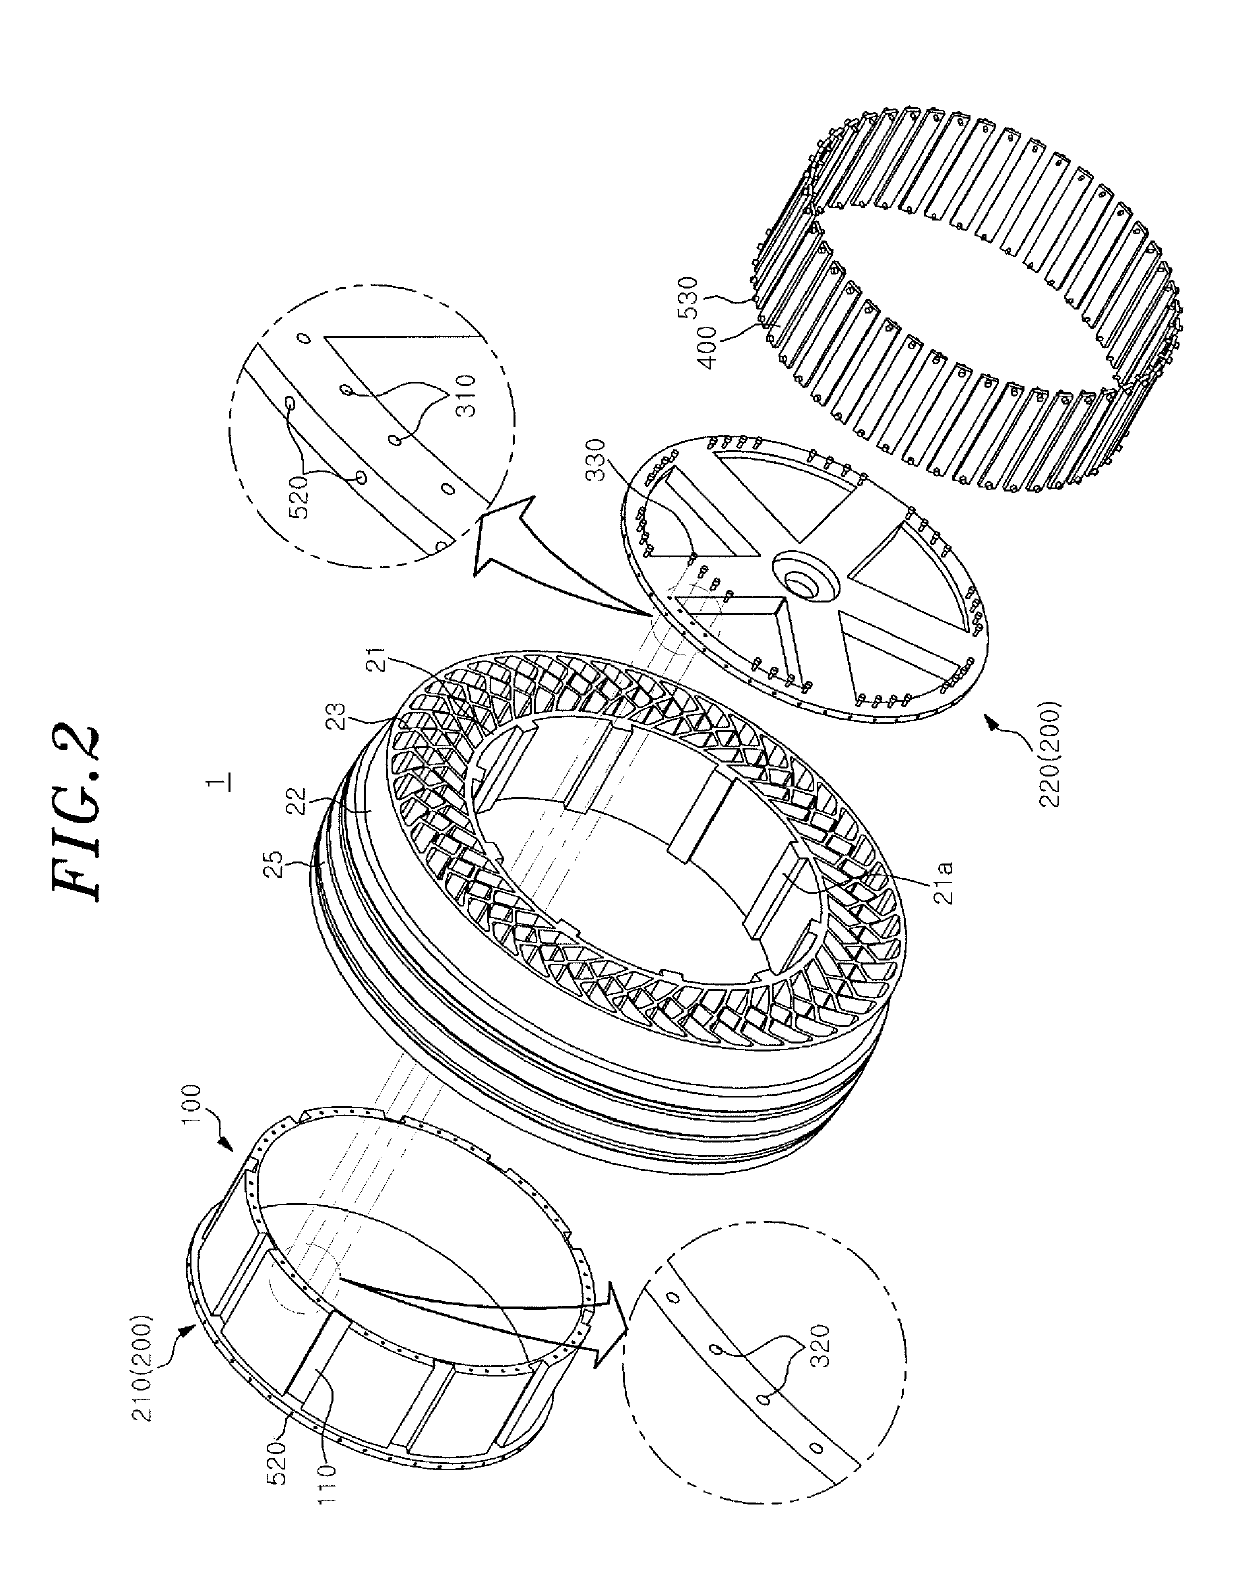 Rim for non-pneumatic tire and wheel including the same